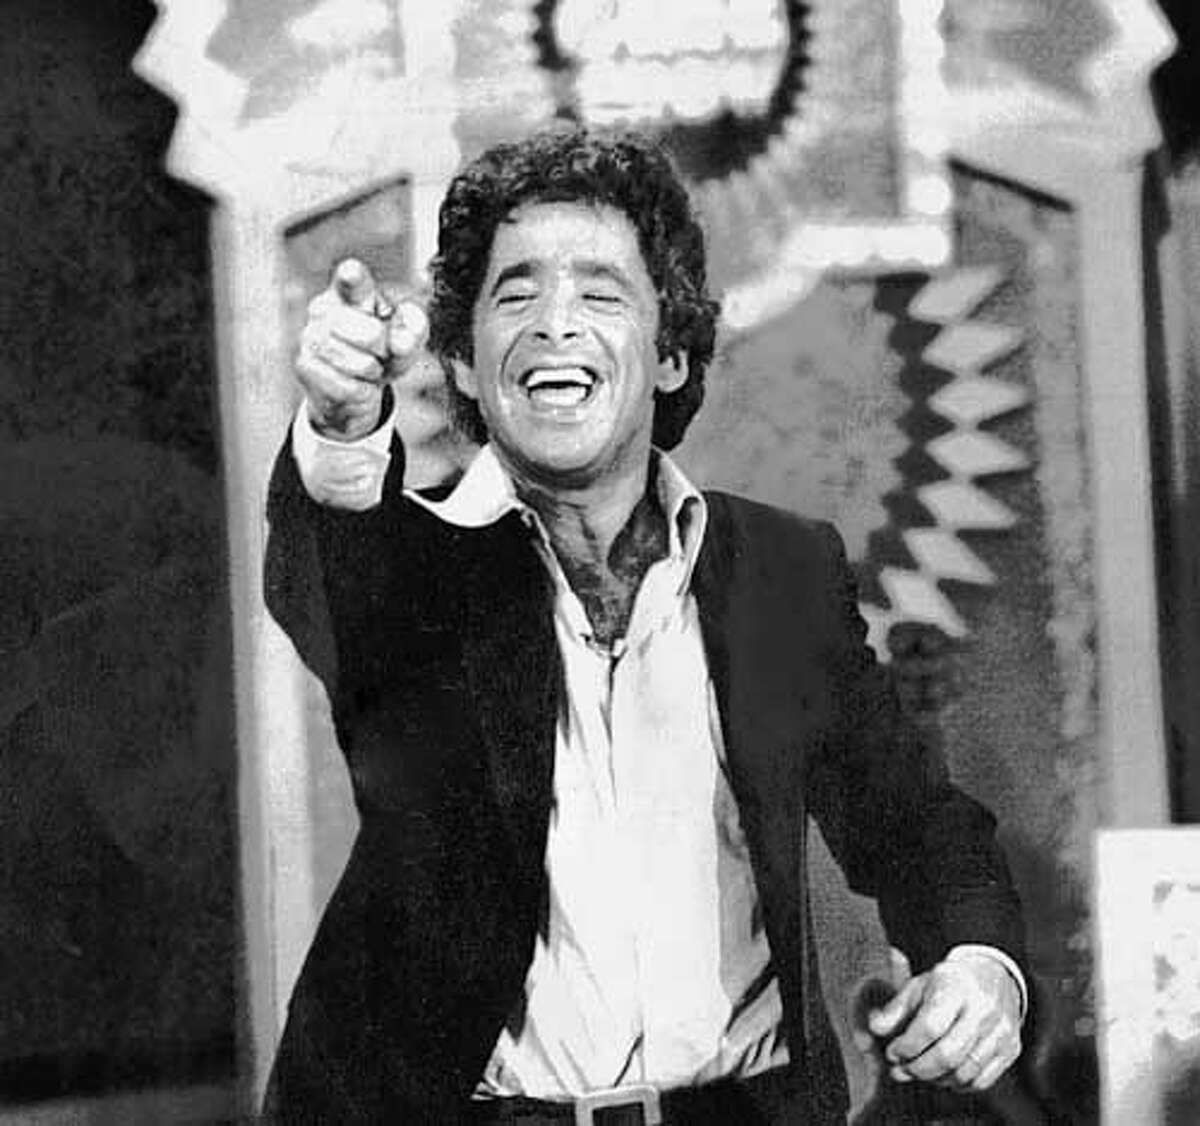 Chuck Barris' "The Gong Show" was the predecessor of today's reality and talent programs